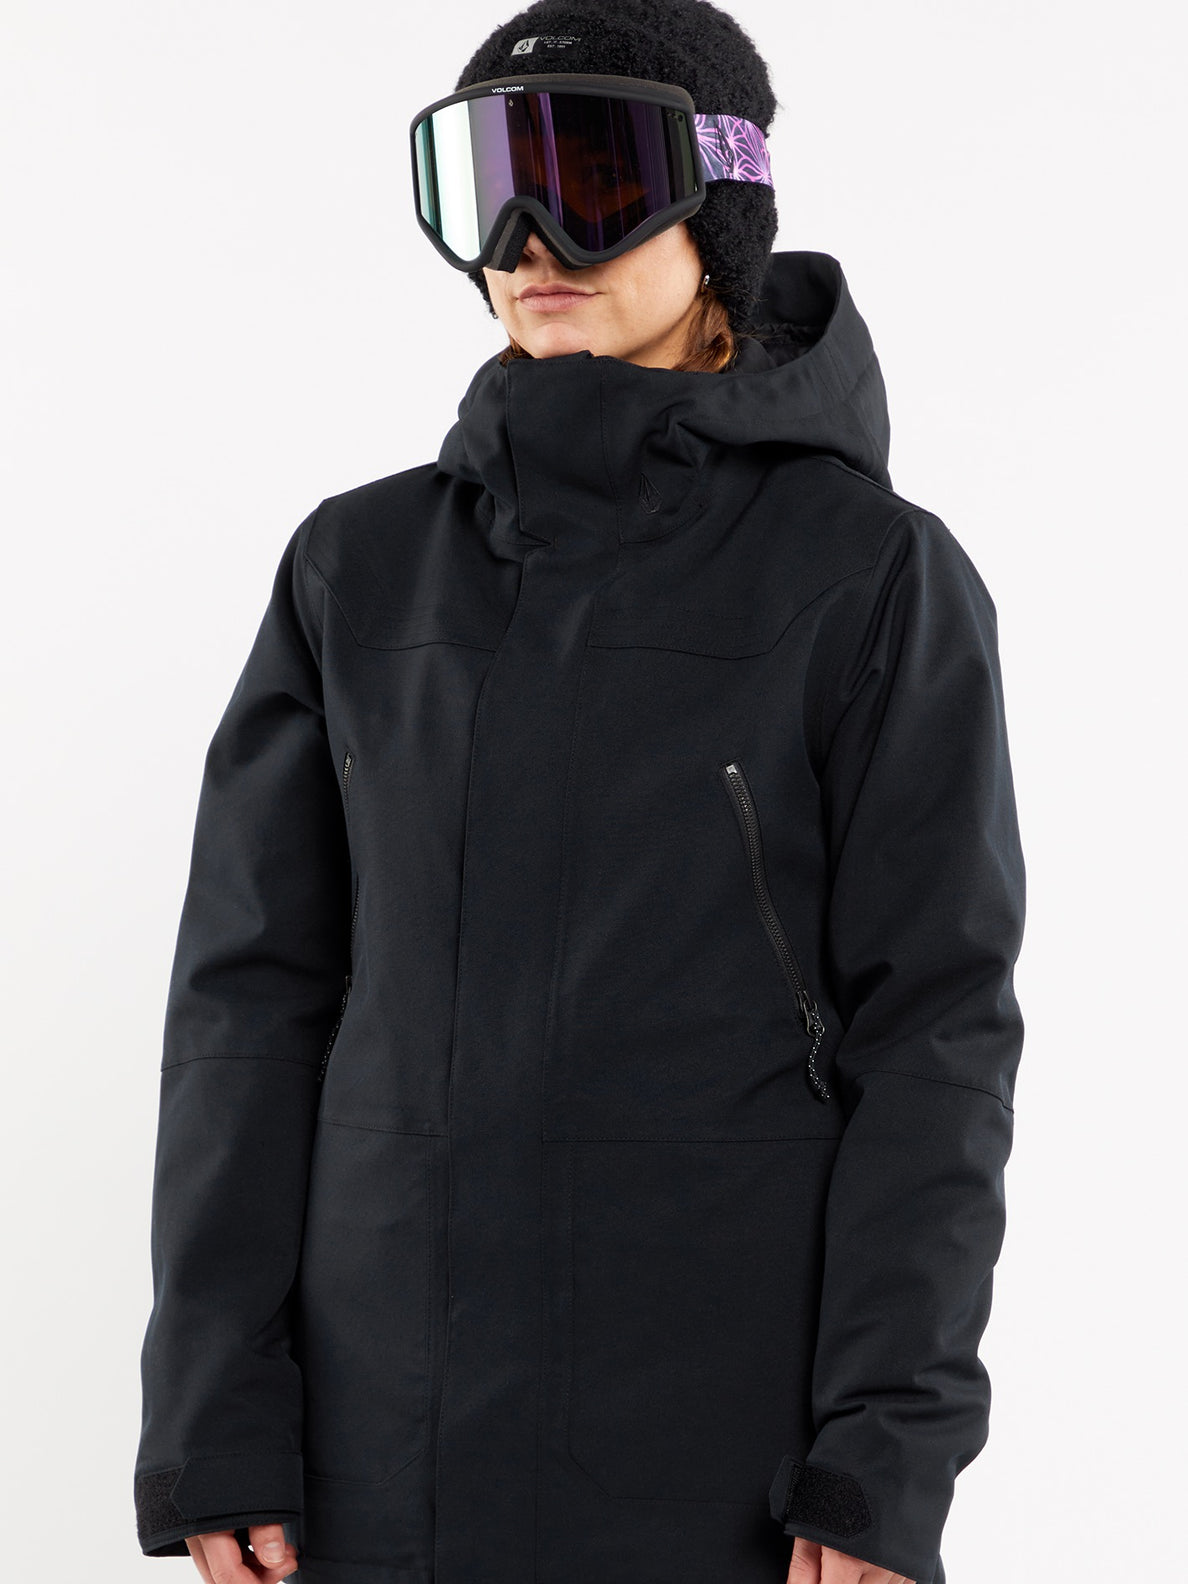 Womens Shadow Insulated Jacket - Black (H0452408_BLK) [33]